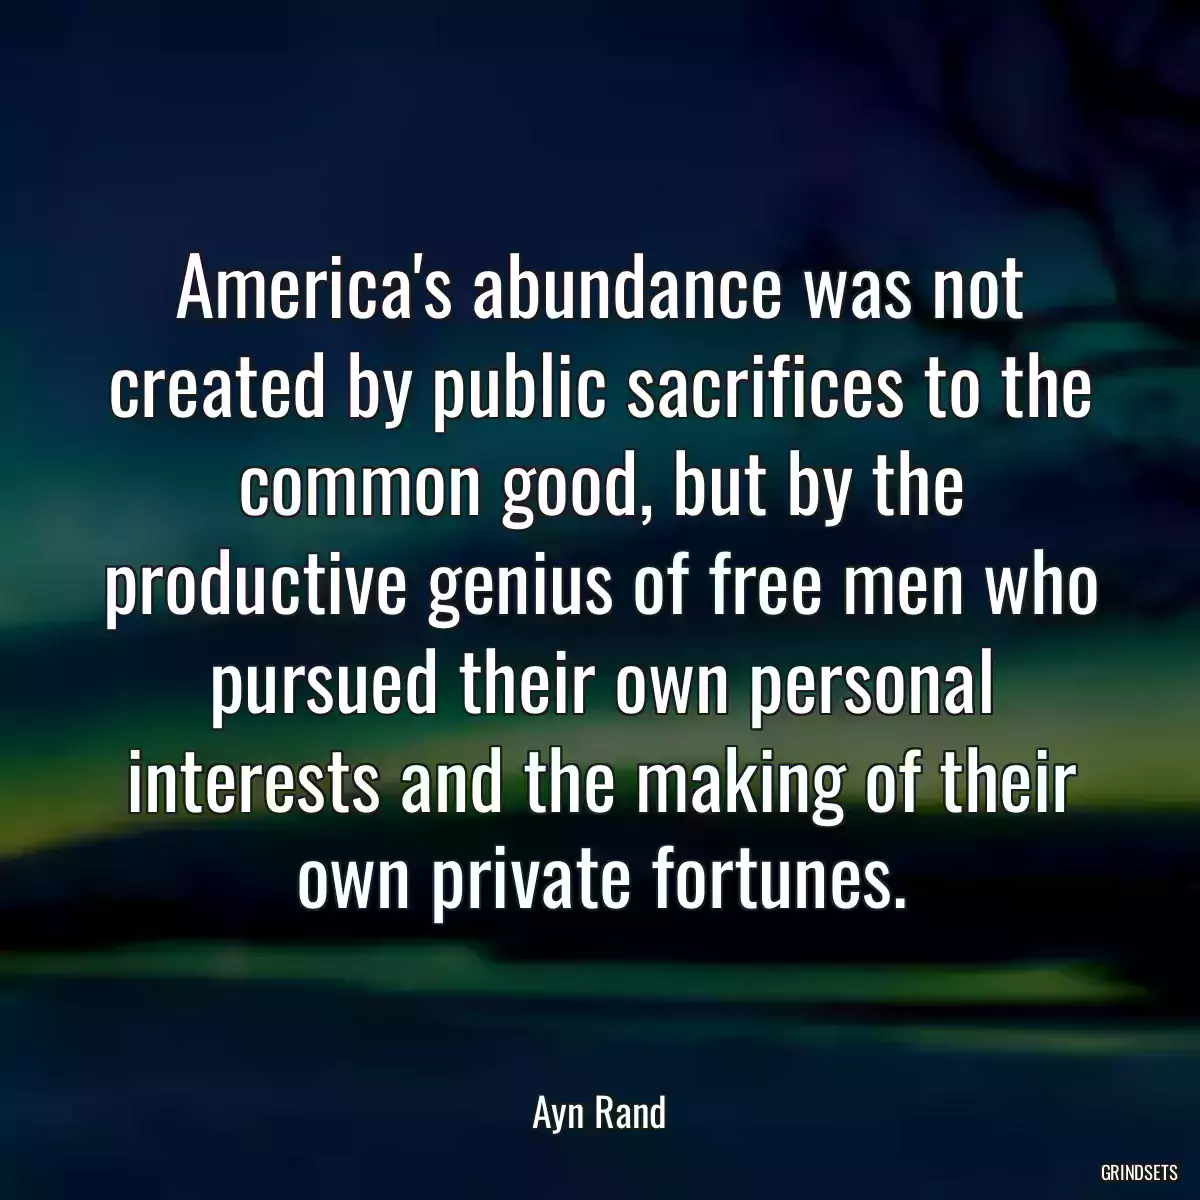 America\'s abundance was not created by public sacrifices to the common good, but by the productive genius of free men who pursued their own personal interests and the making of their own private fortunes.